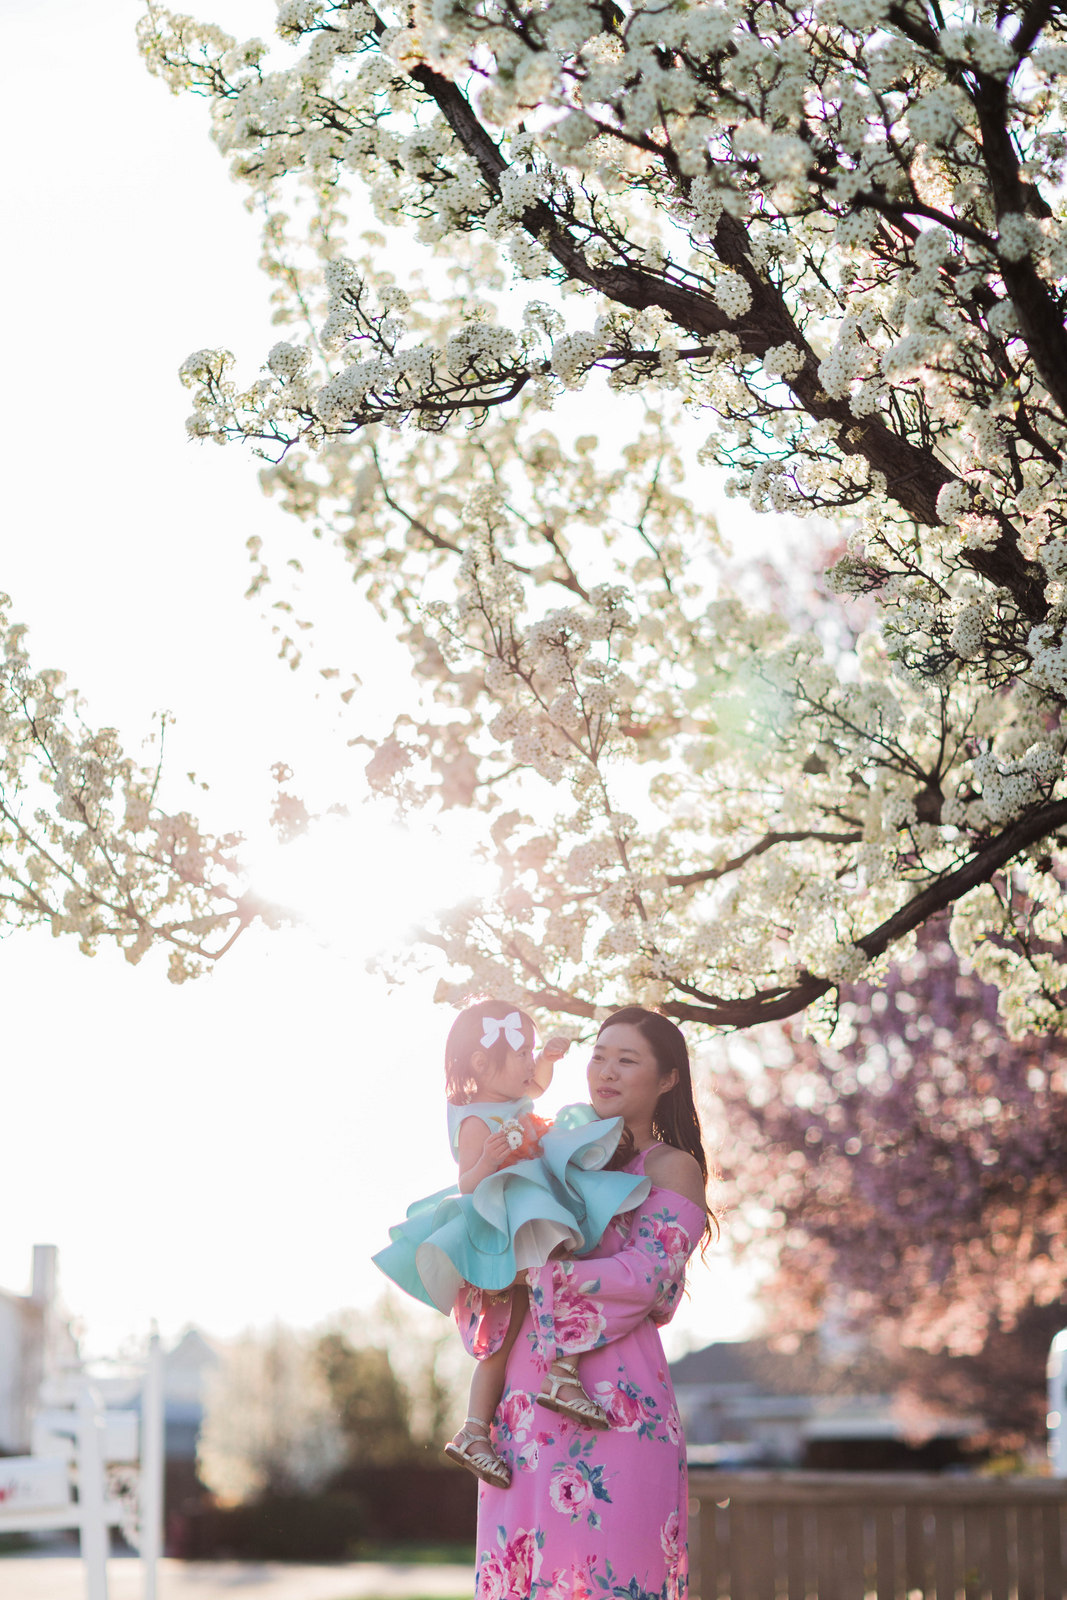 5 Fun Mothers Day Activities Every Mom Will Love by lifestyle blogger Sandy A La Mode